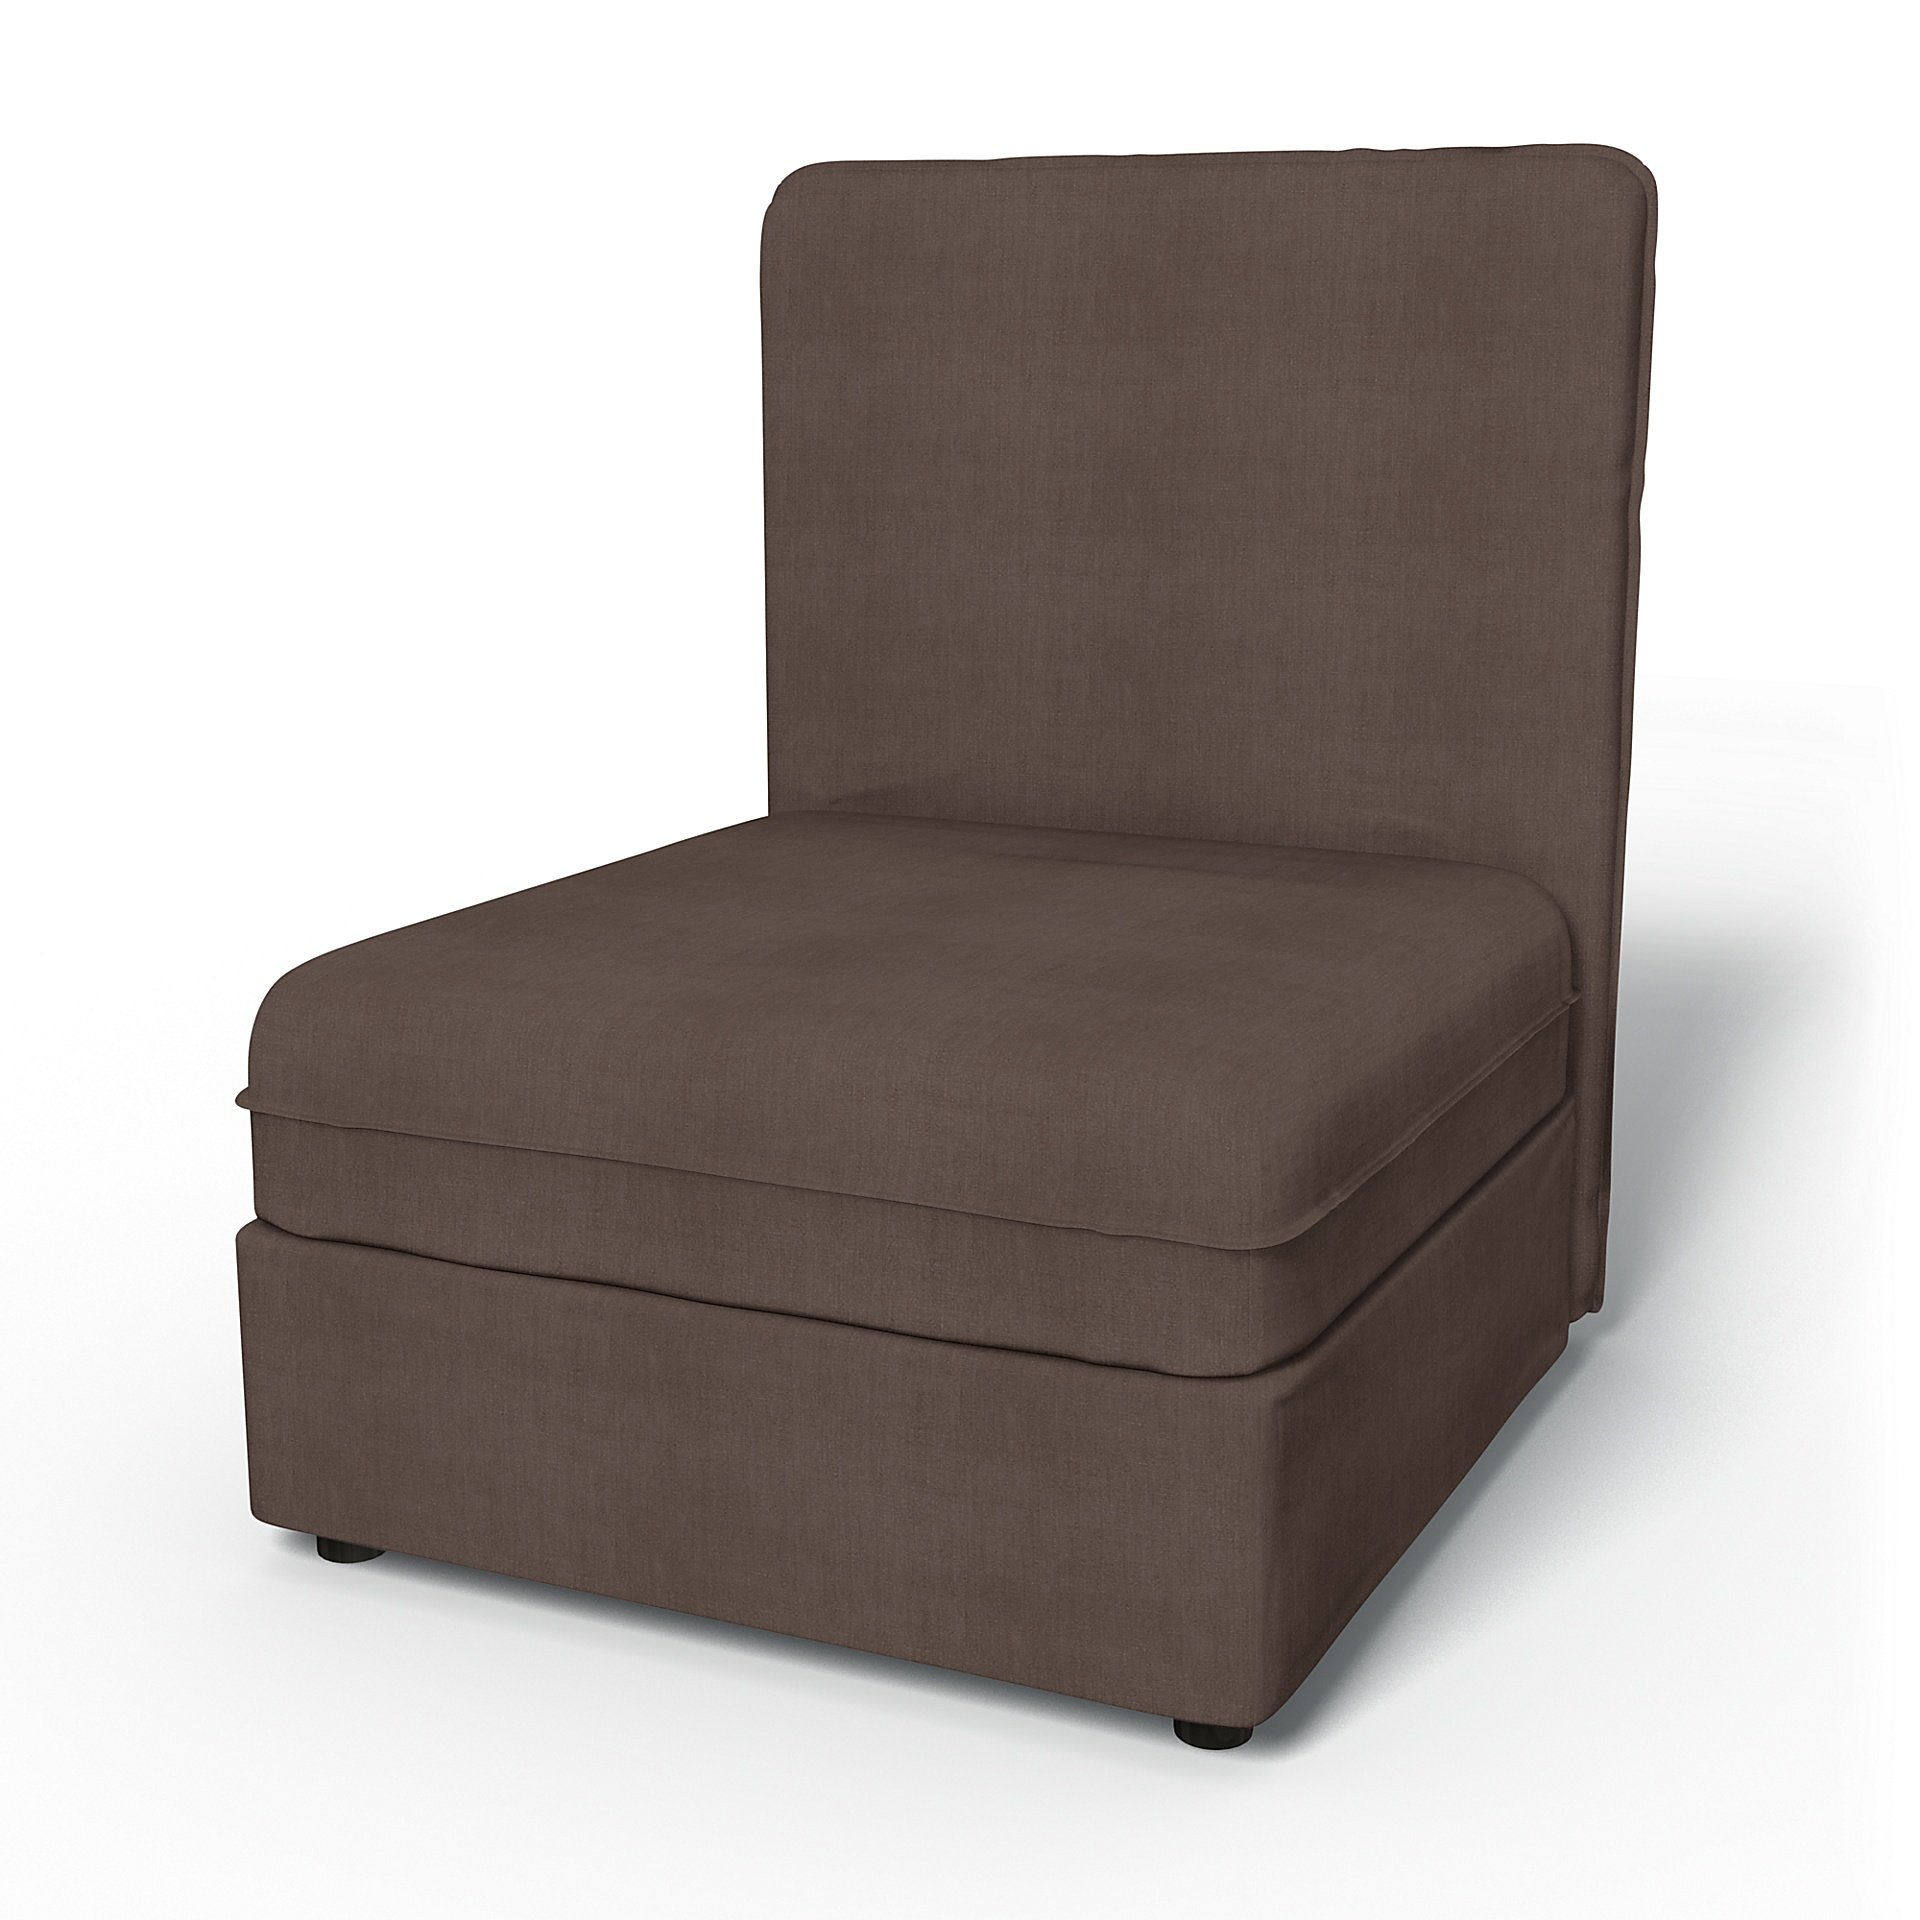 IKEA - Vallentuna Seat Module with High Back and Storage Cover 80x100cm 32x39in, Cocoa, Linen - Bemz